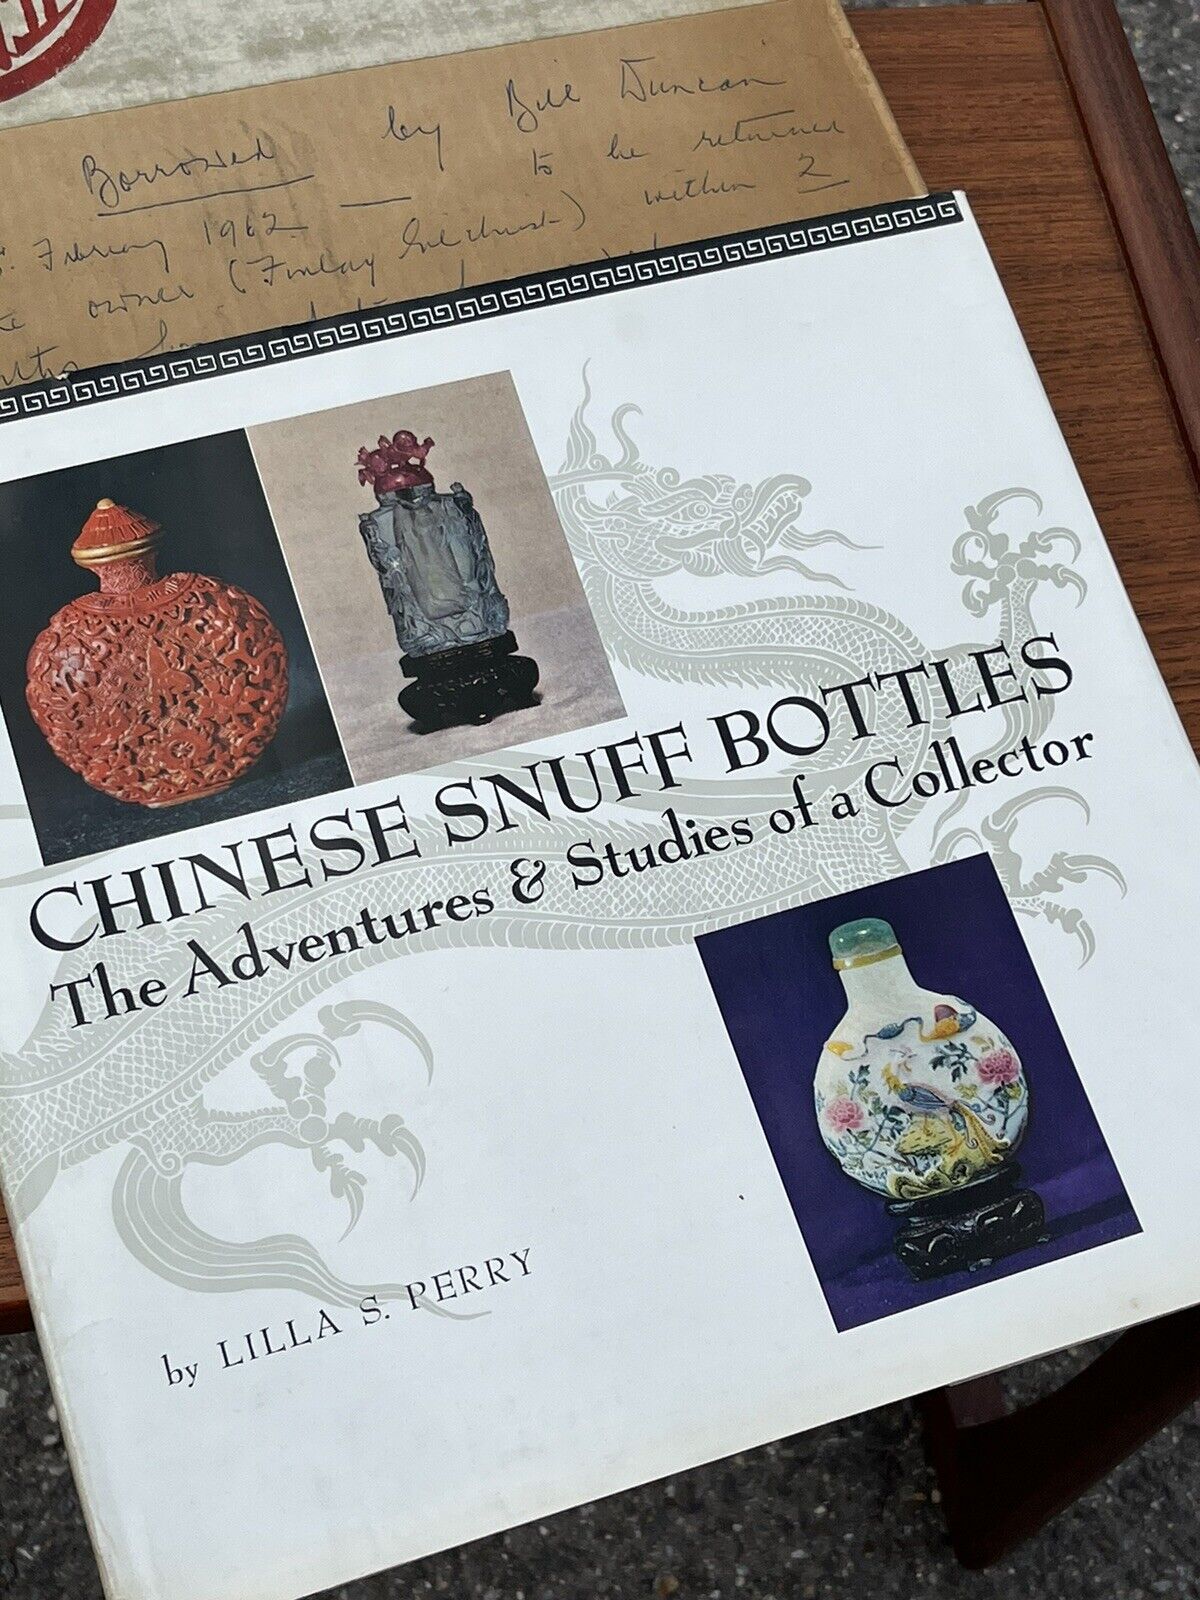 Chinese Snuff Bottles. The Adventures & Studies of a Collector by Lilla S Perry.